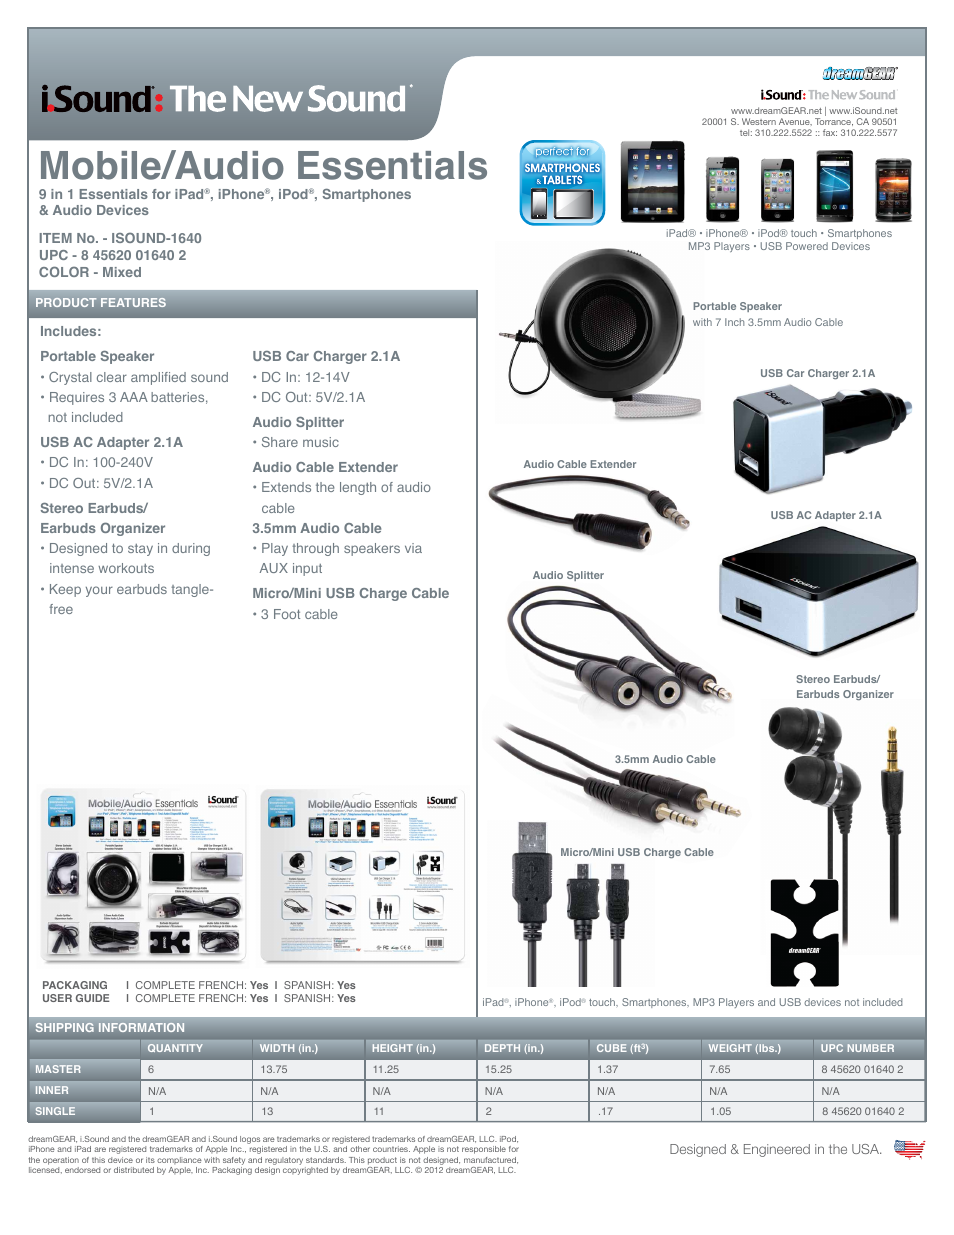 Mobile Audio Essentials - Sell Sheet